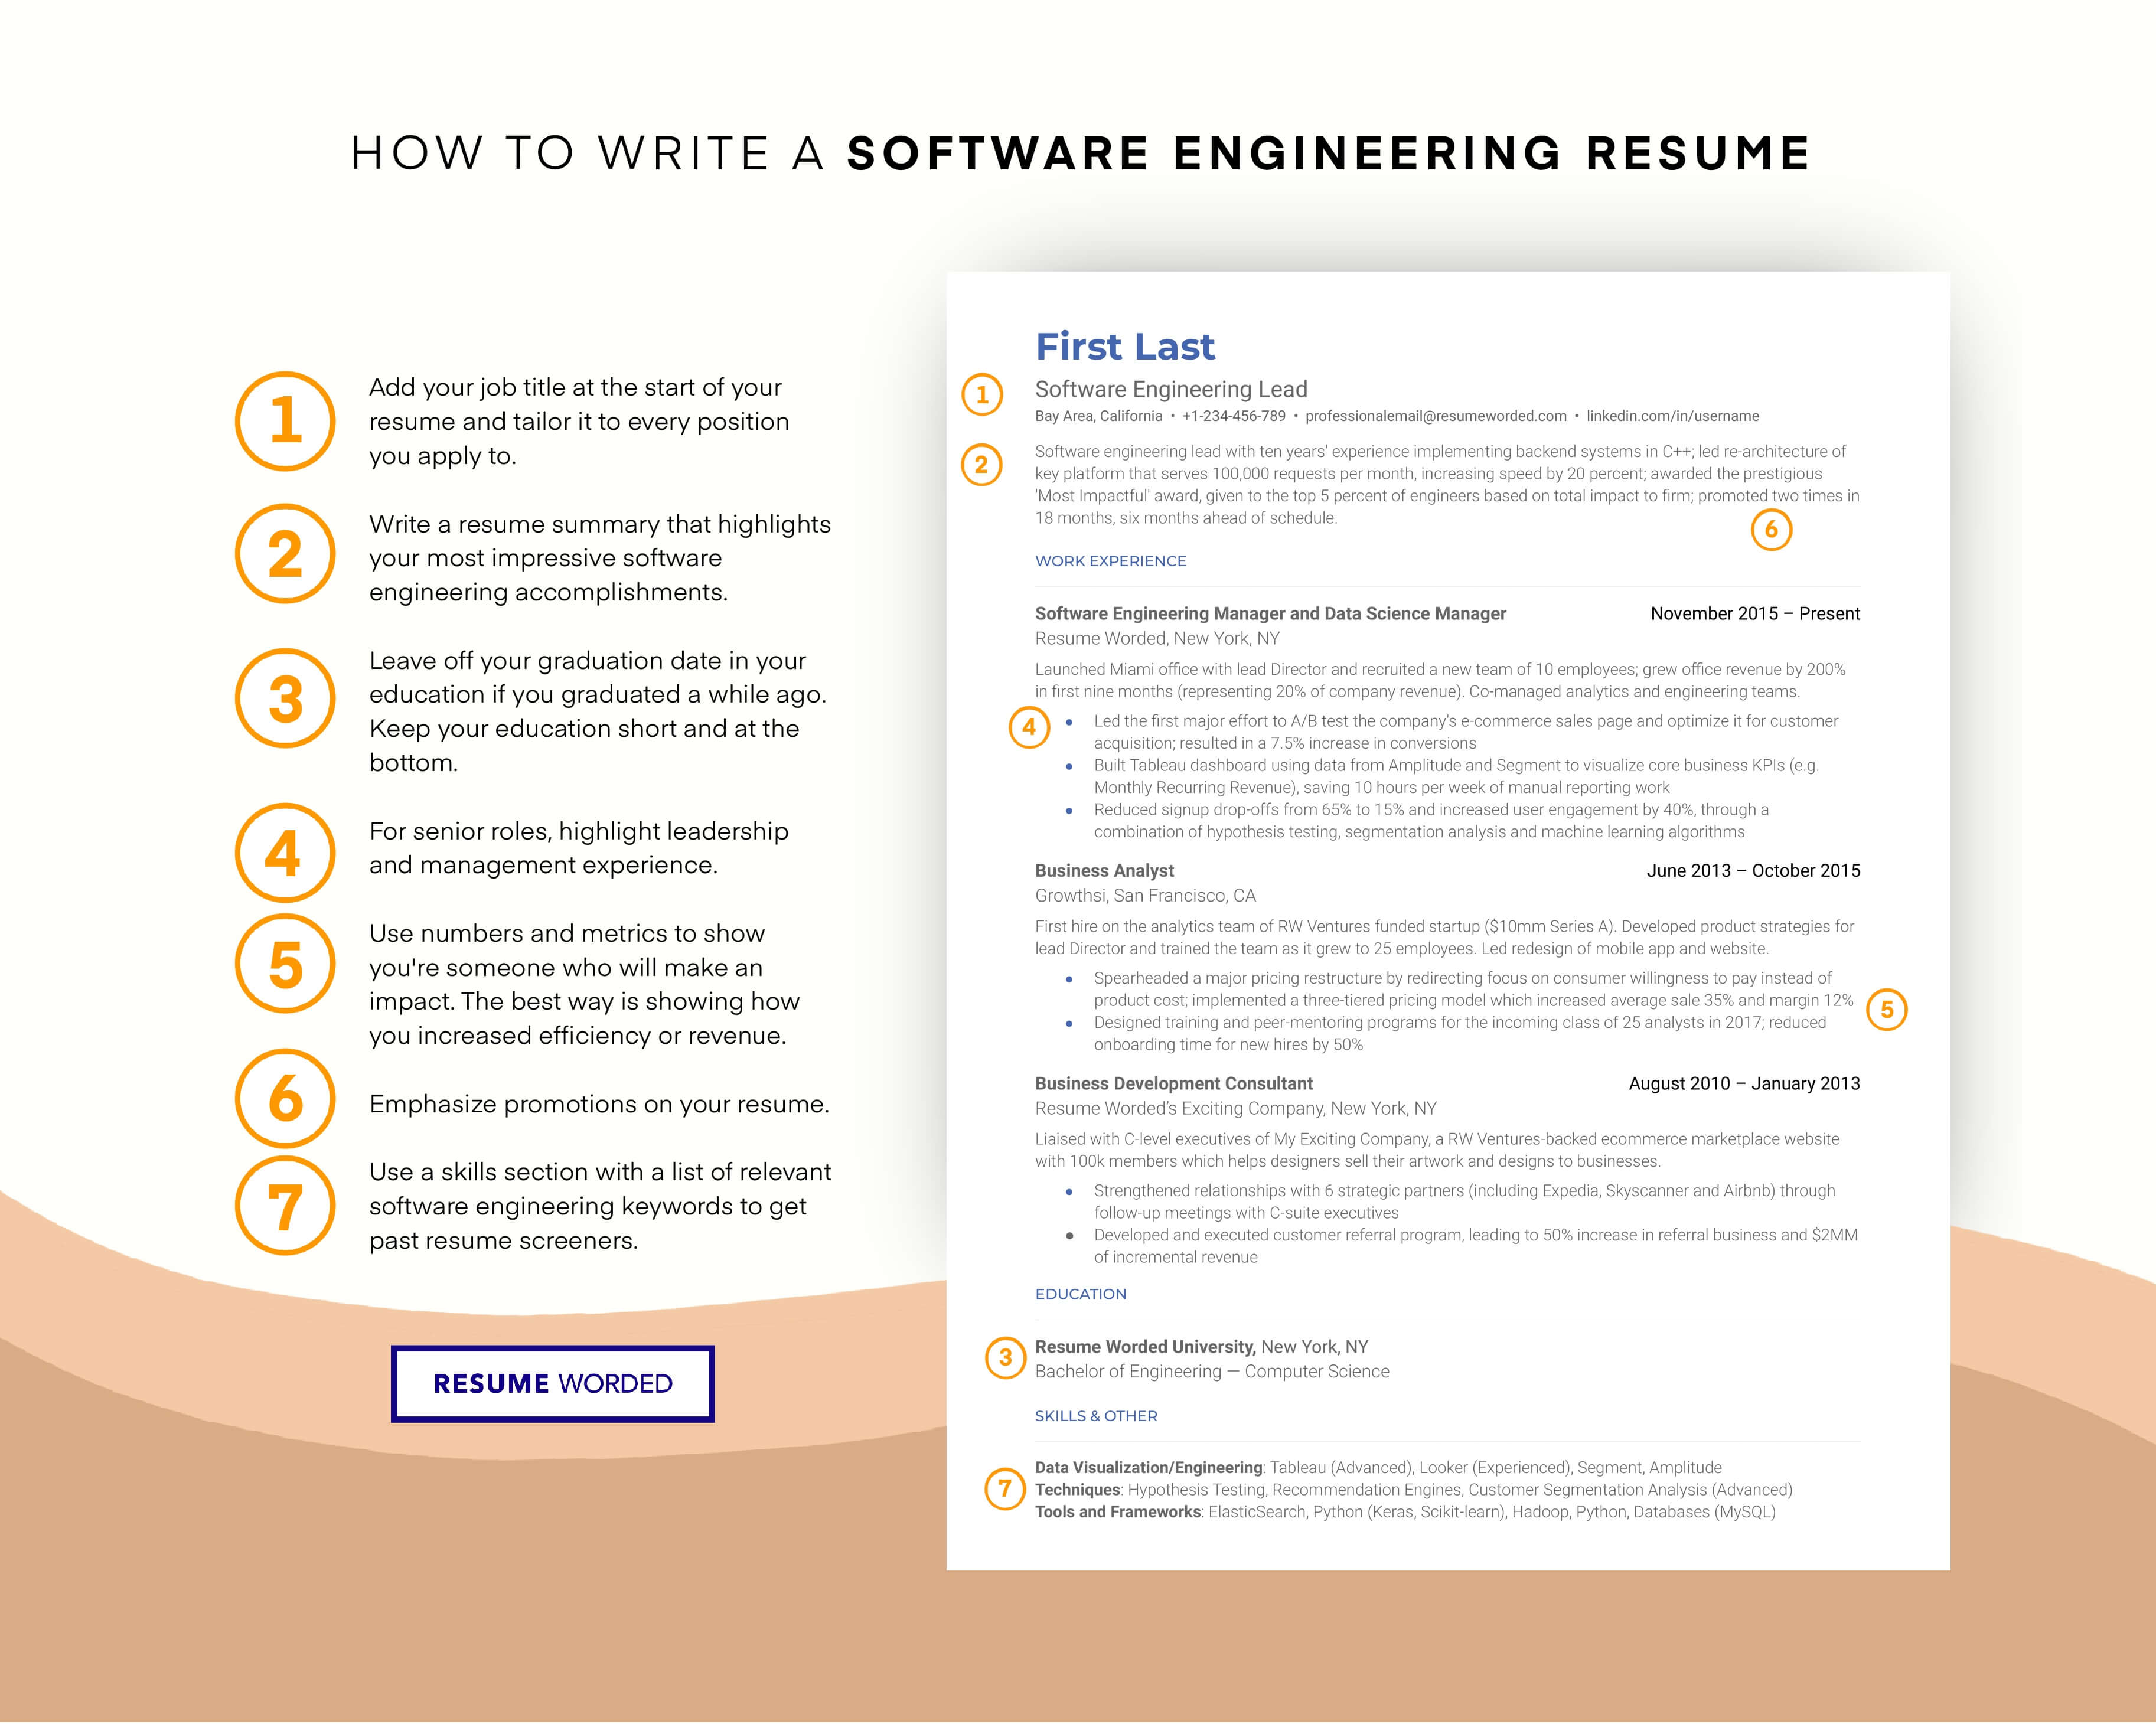 Demonstrate your understanding of software product lifecycle - Software Product Manager CV